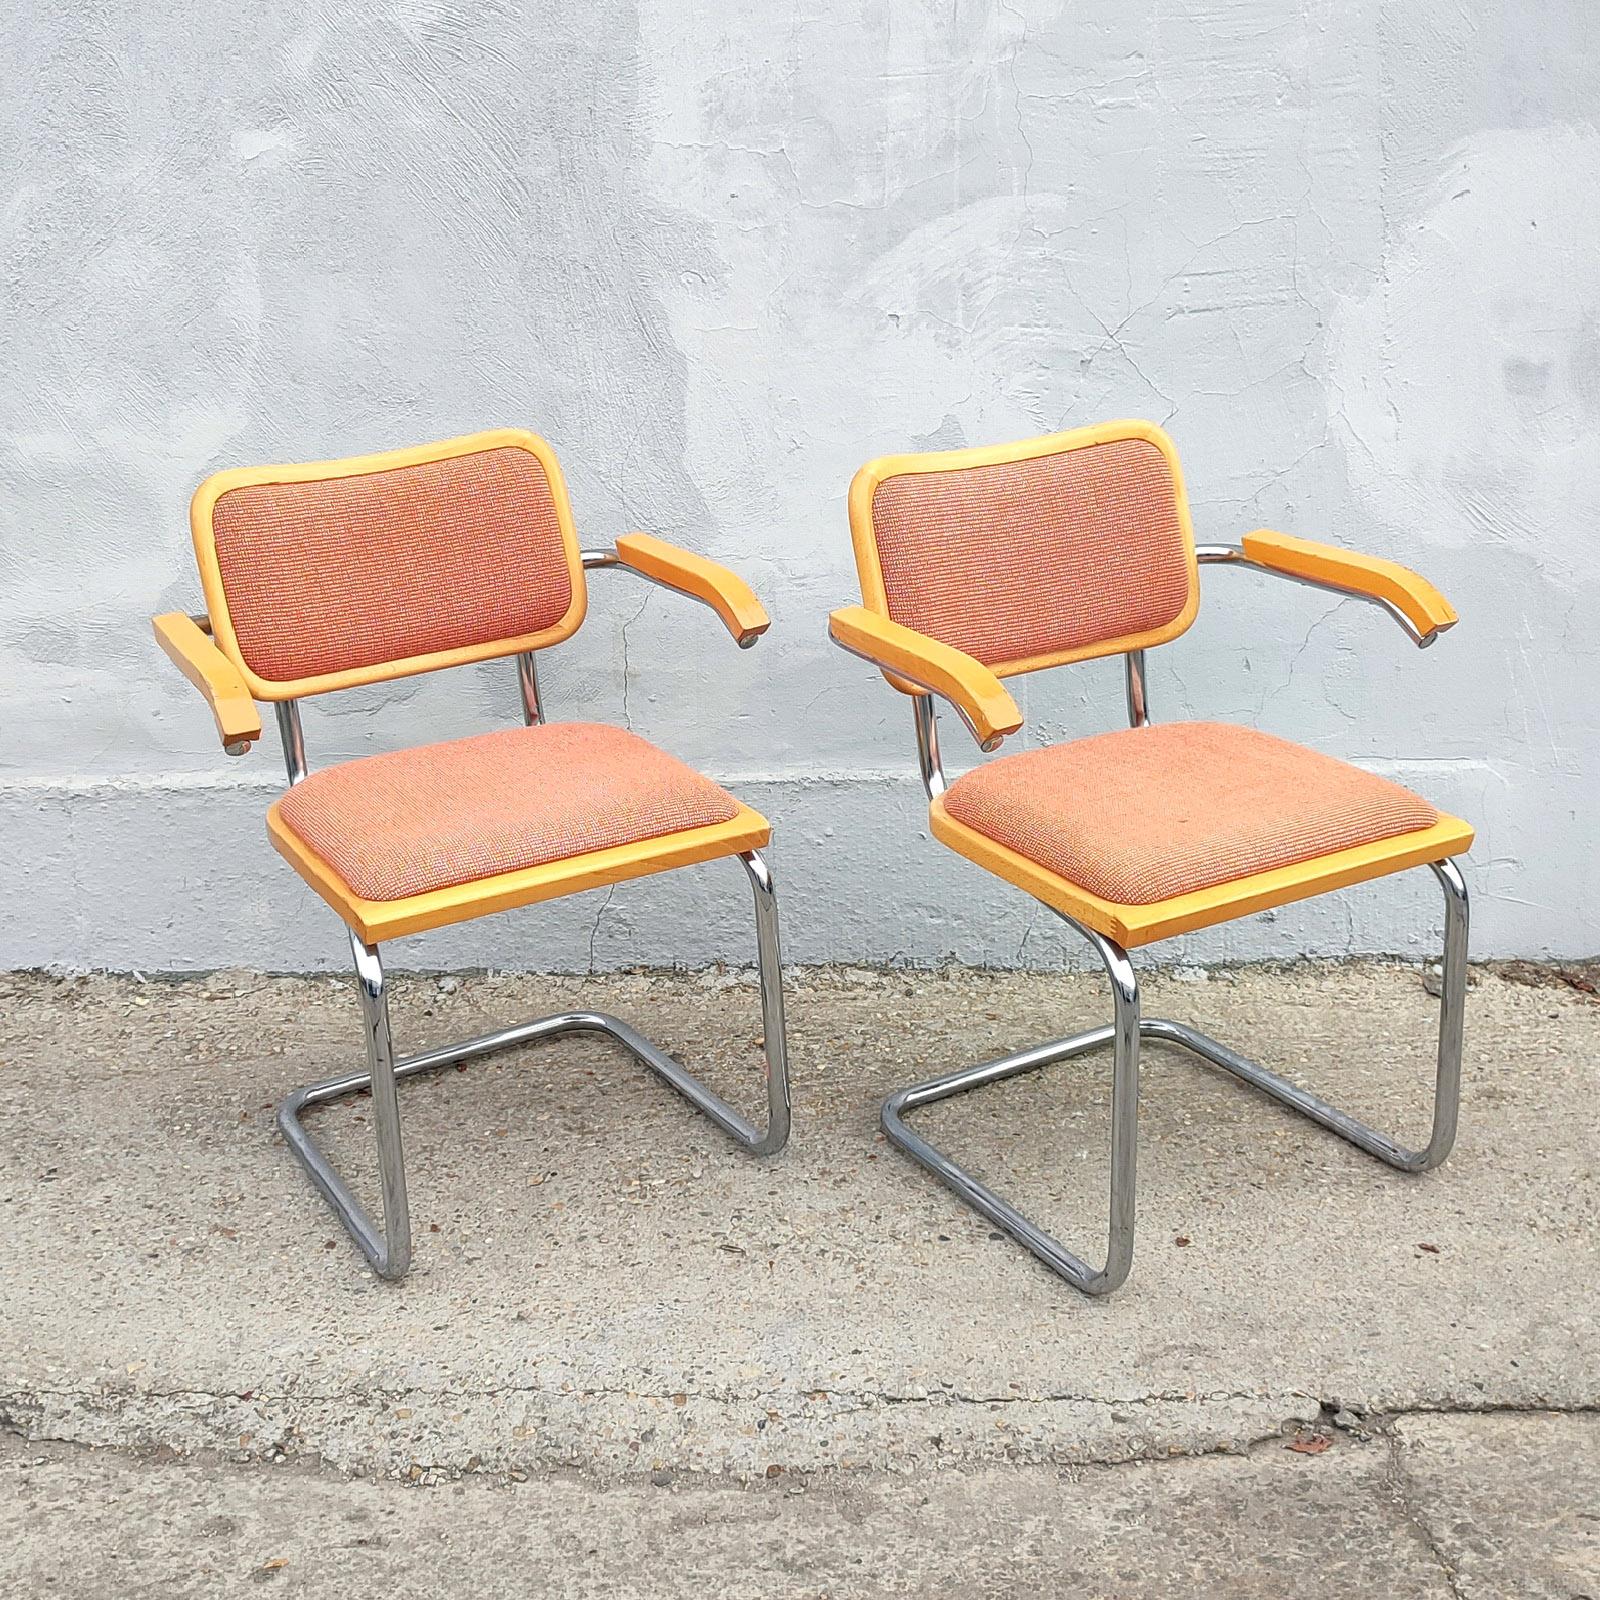 Late 20th Century Pair of Wood Upholstery and Nickel Cesca Armchairs Chairs, 1970s For Sale